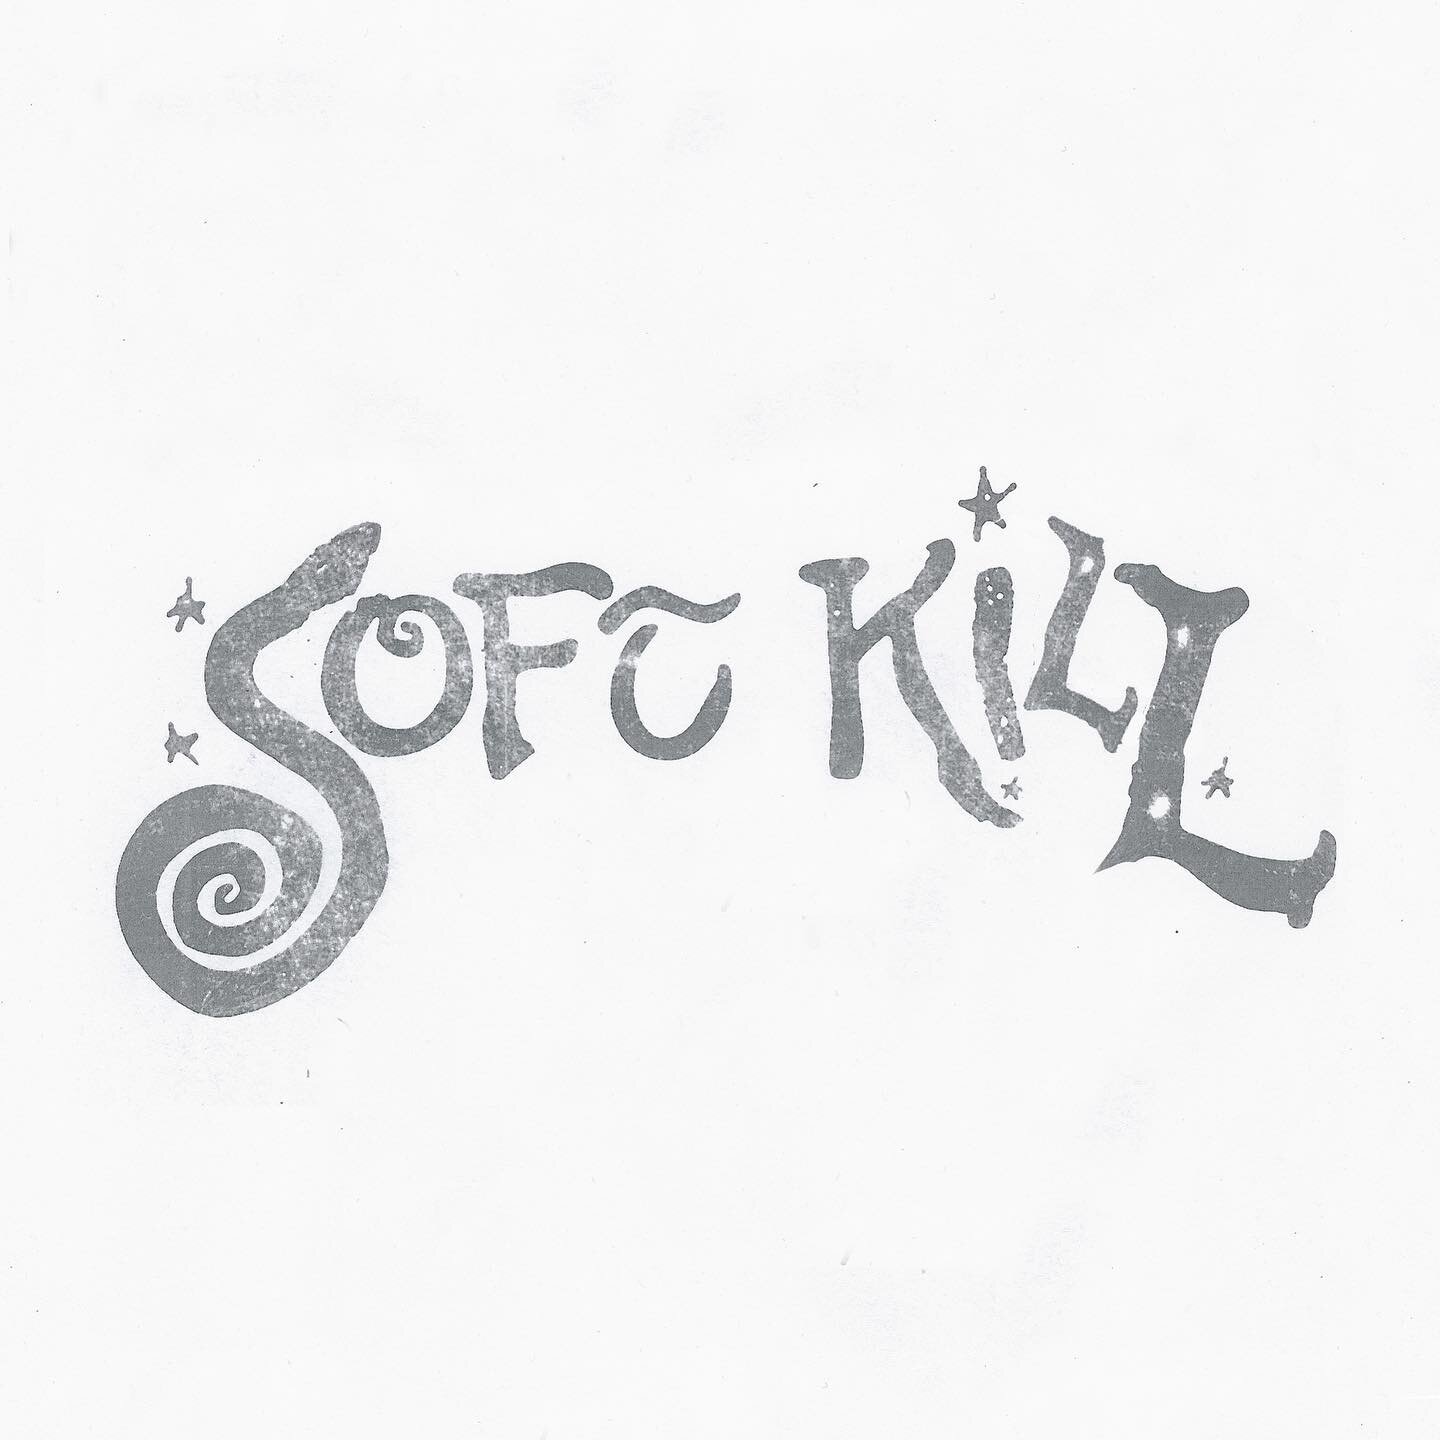 Some logo magic 🪄 for @softkillpdx